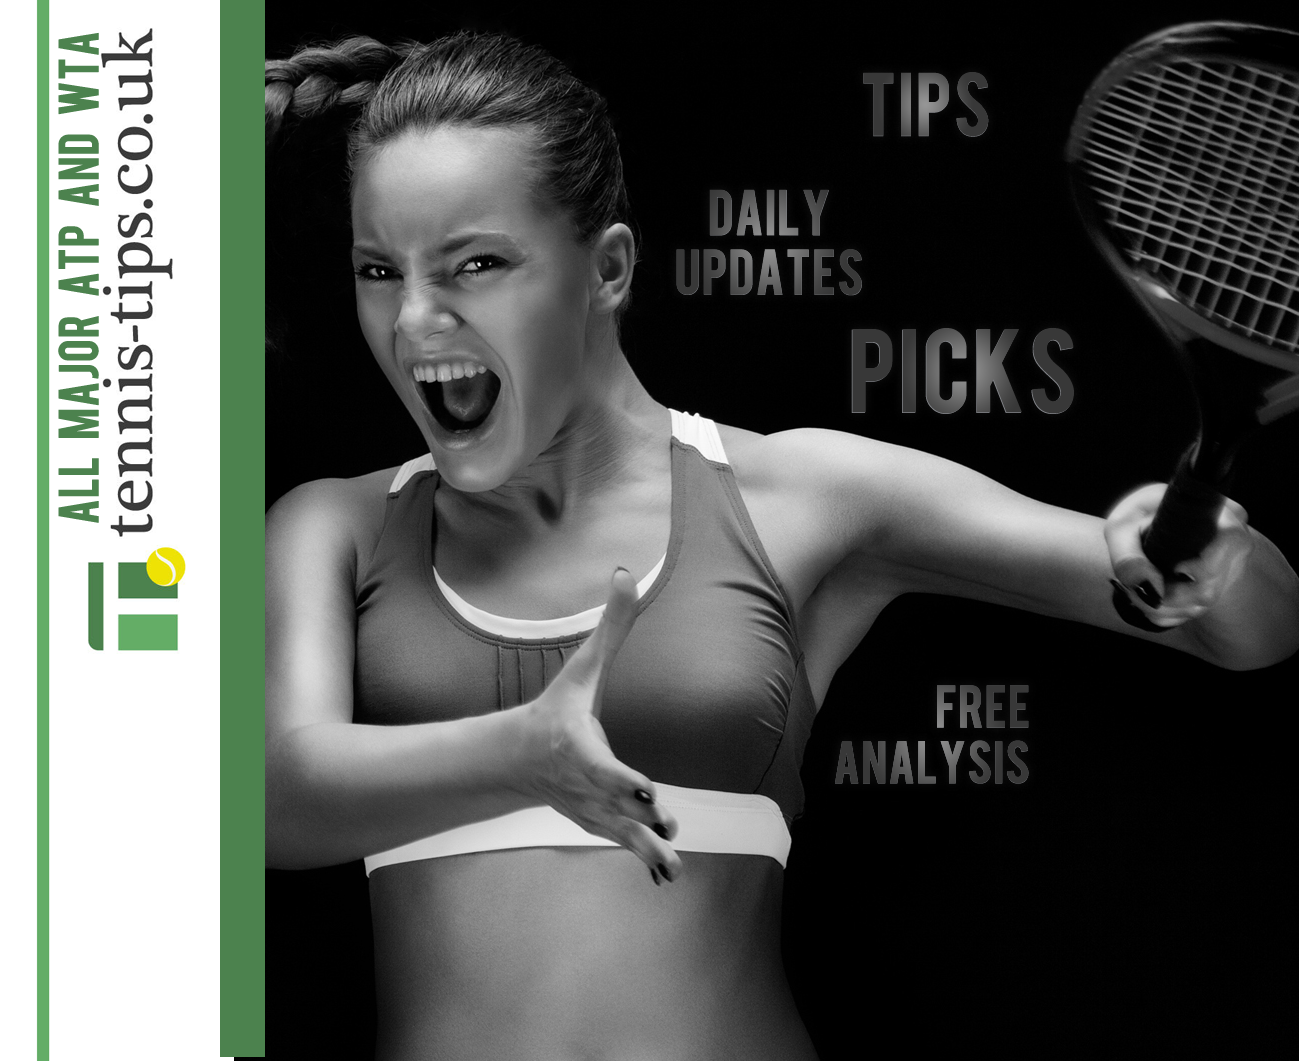 tennis betting tips and analysis